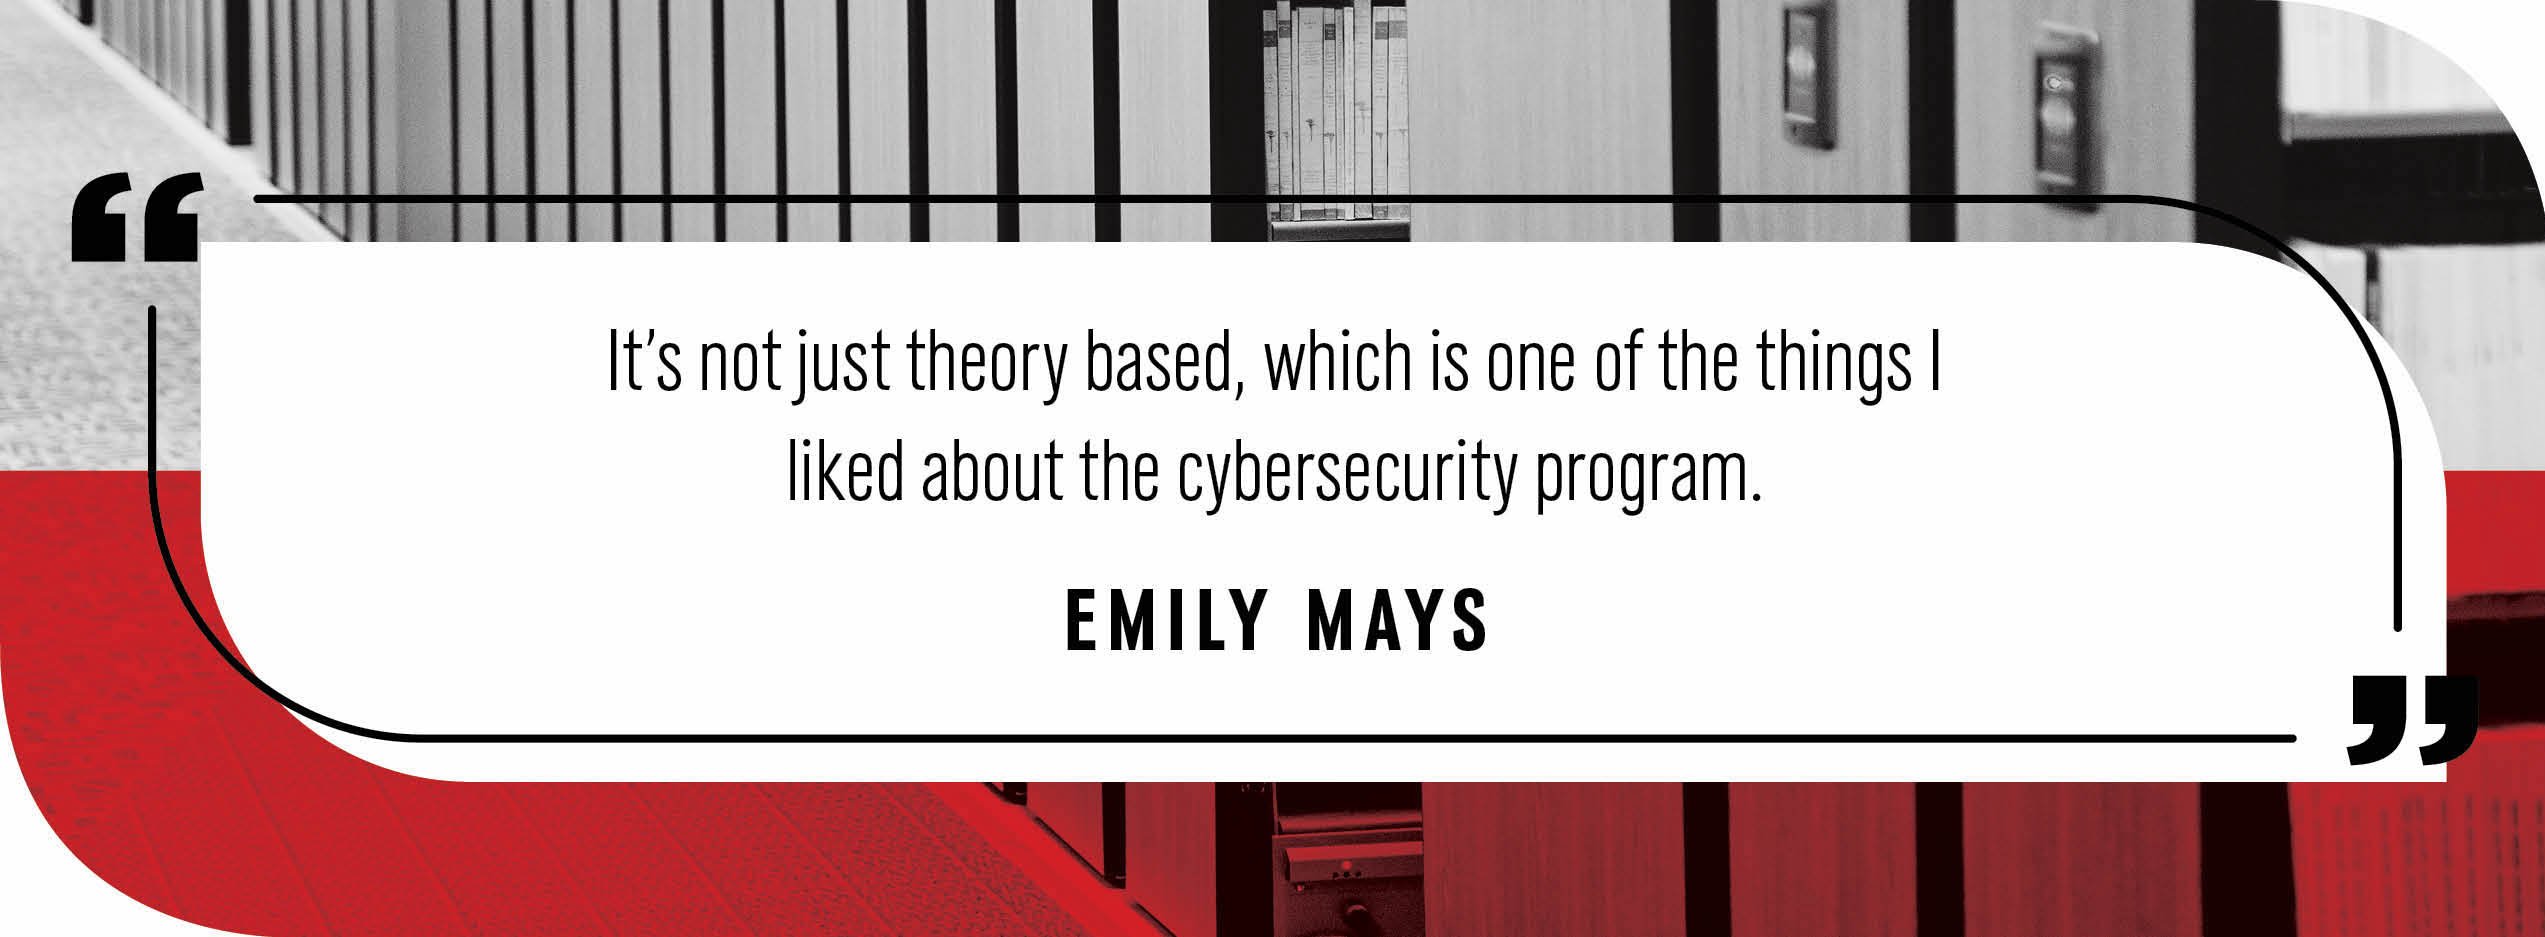 Quote by Emily Mays: "It’s not just theory based, which is one of the things I liked about the cybersecurity program."